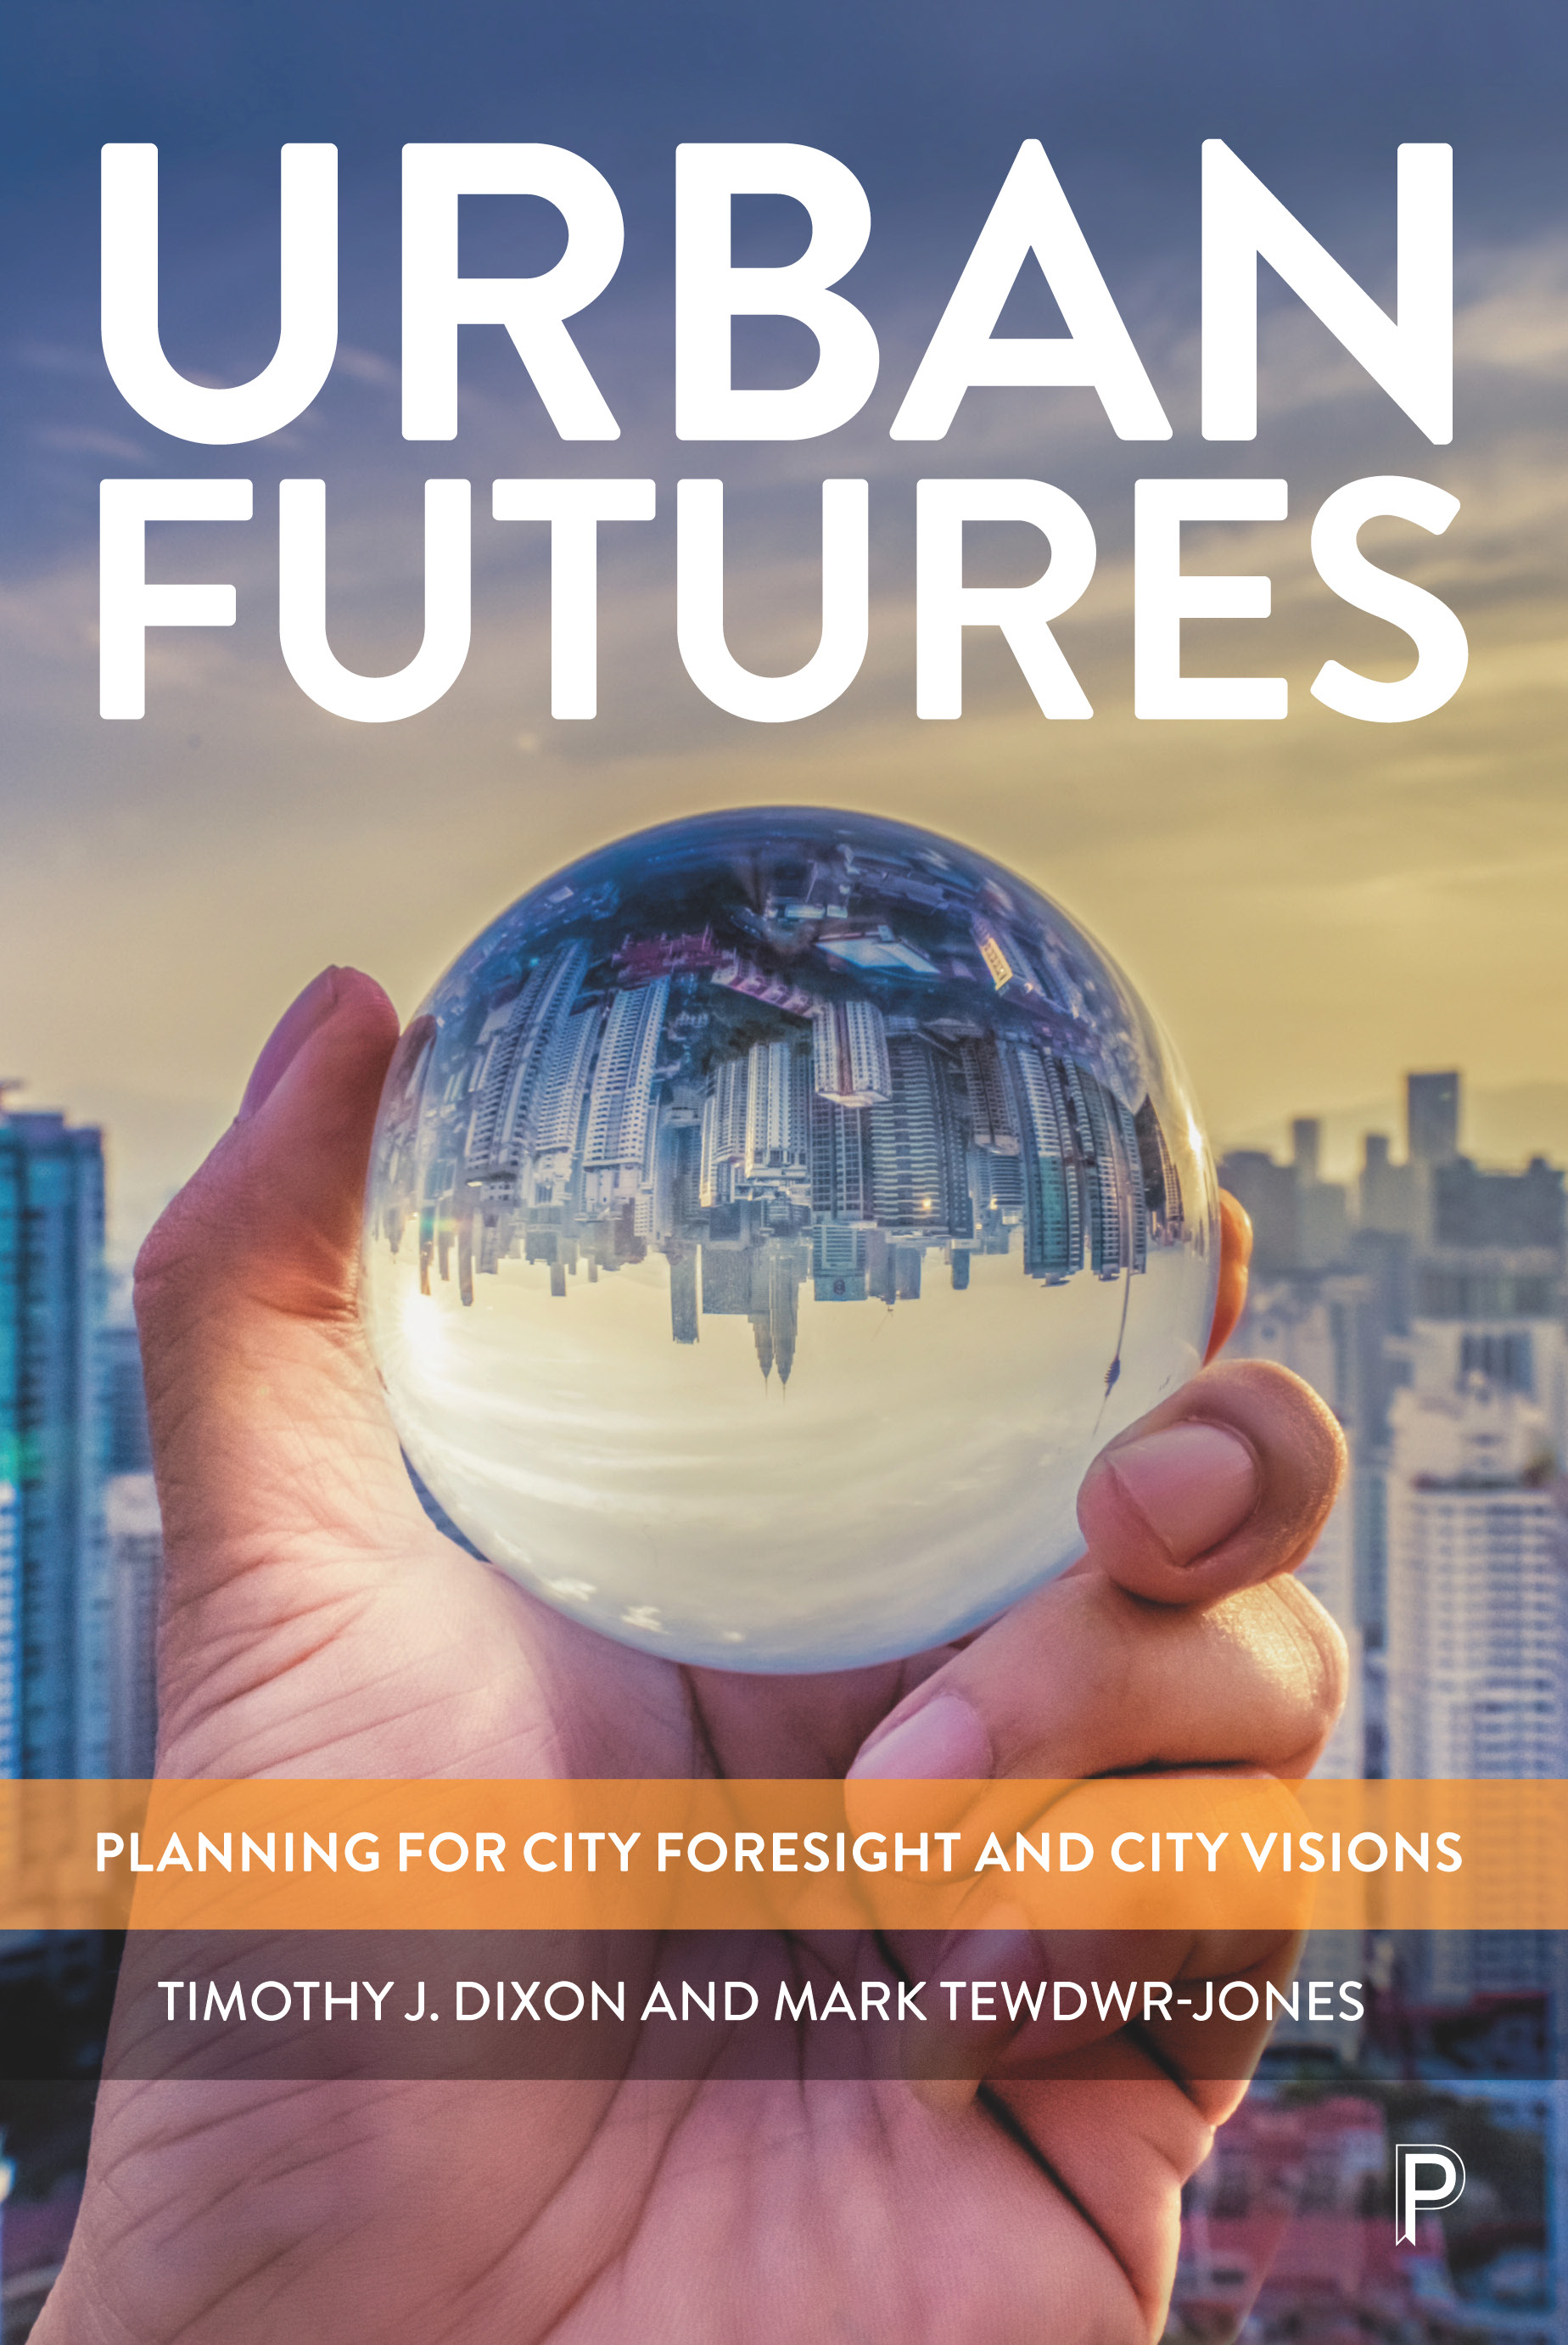 Urban Futures: Planning for City Foresight and City Visions wins UAA’s Best Book in Urban Affairs